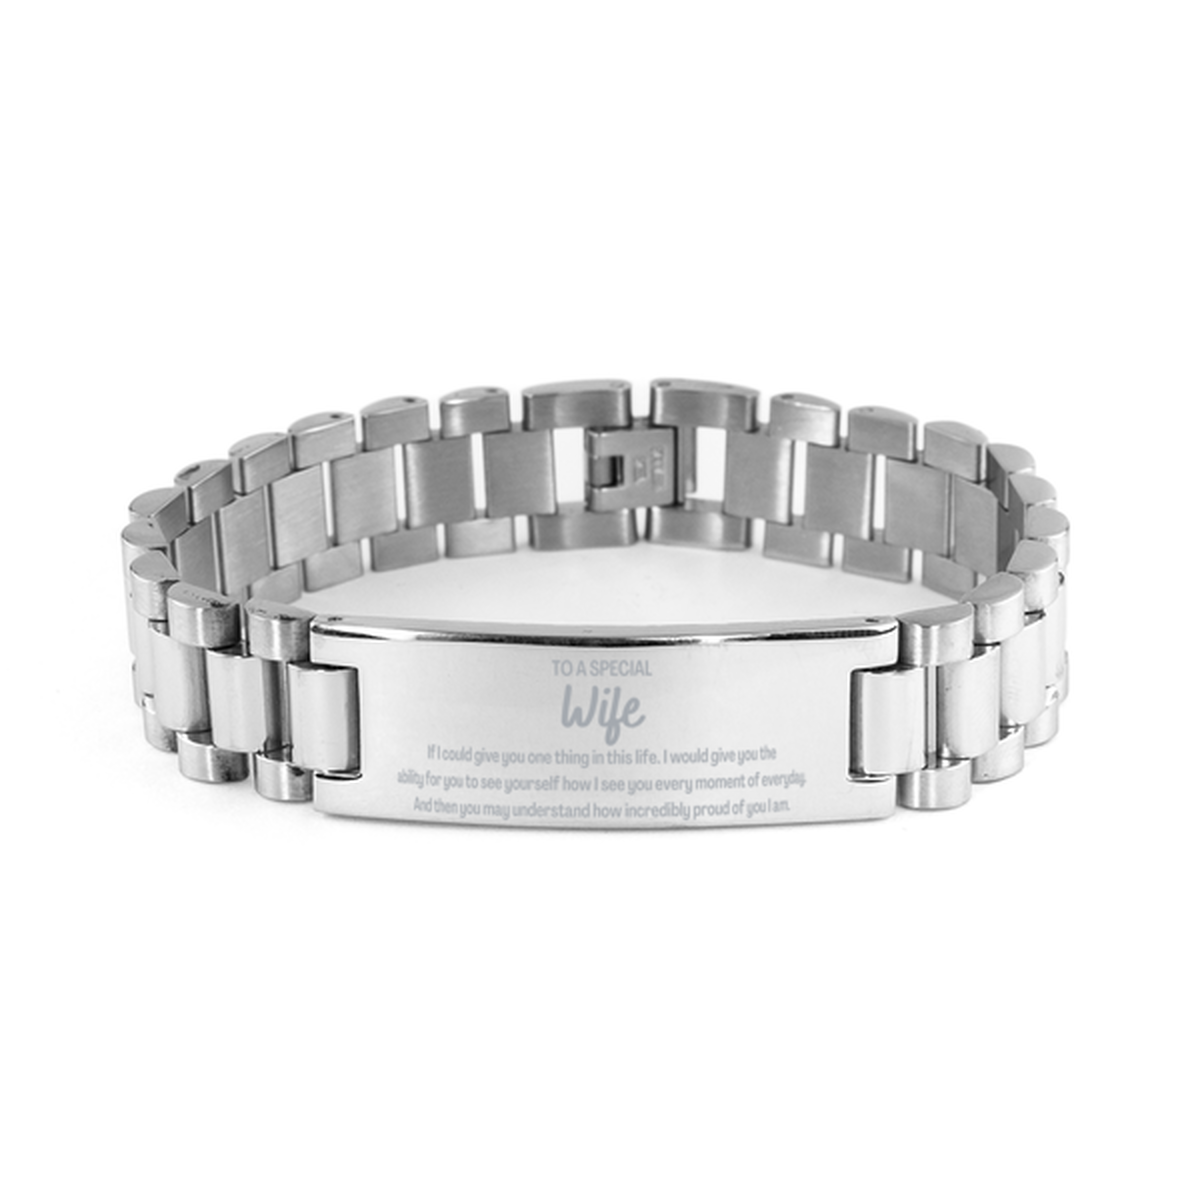 To My Wife Ladder Stainless Steel Bracelet, Gifts For Wife Engraved, Inspirational Gifts for Christmas Birthday, Epic Gifts for Wife To A Special Wife how incredibly proud of you I am